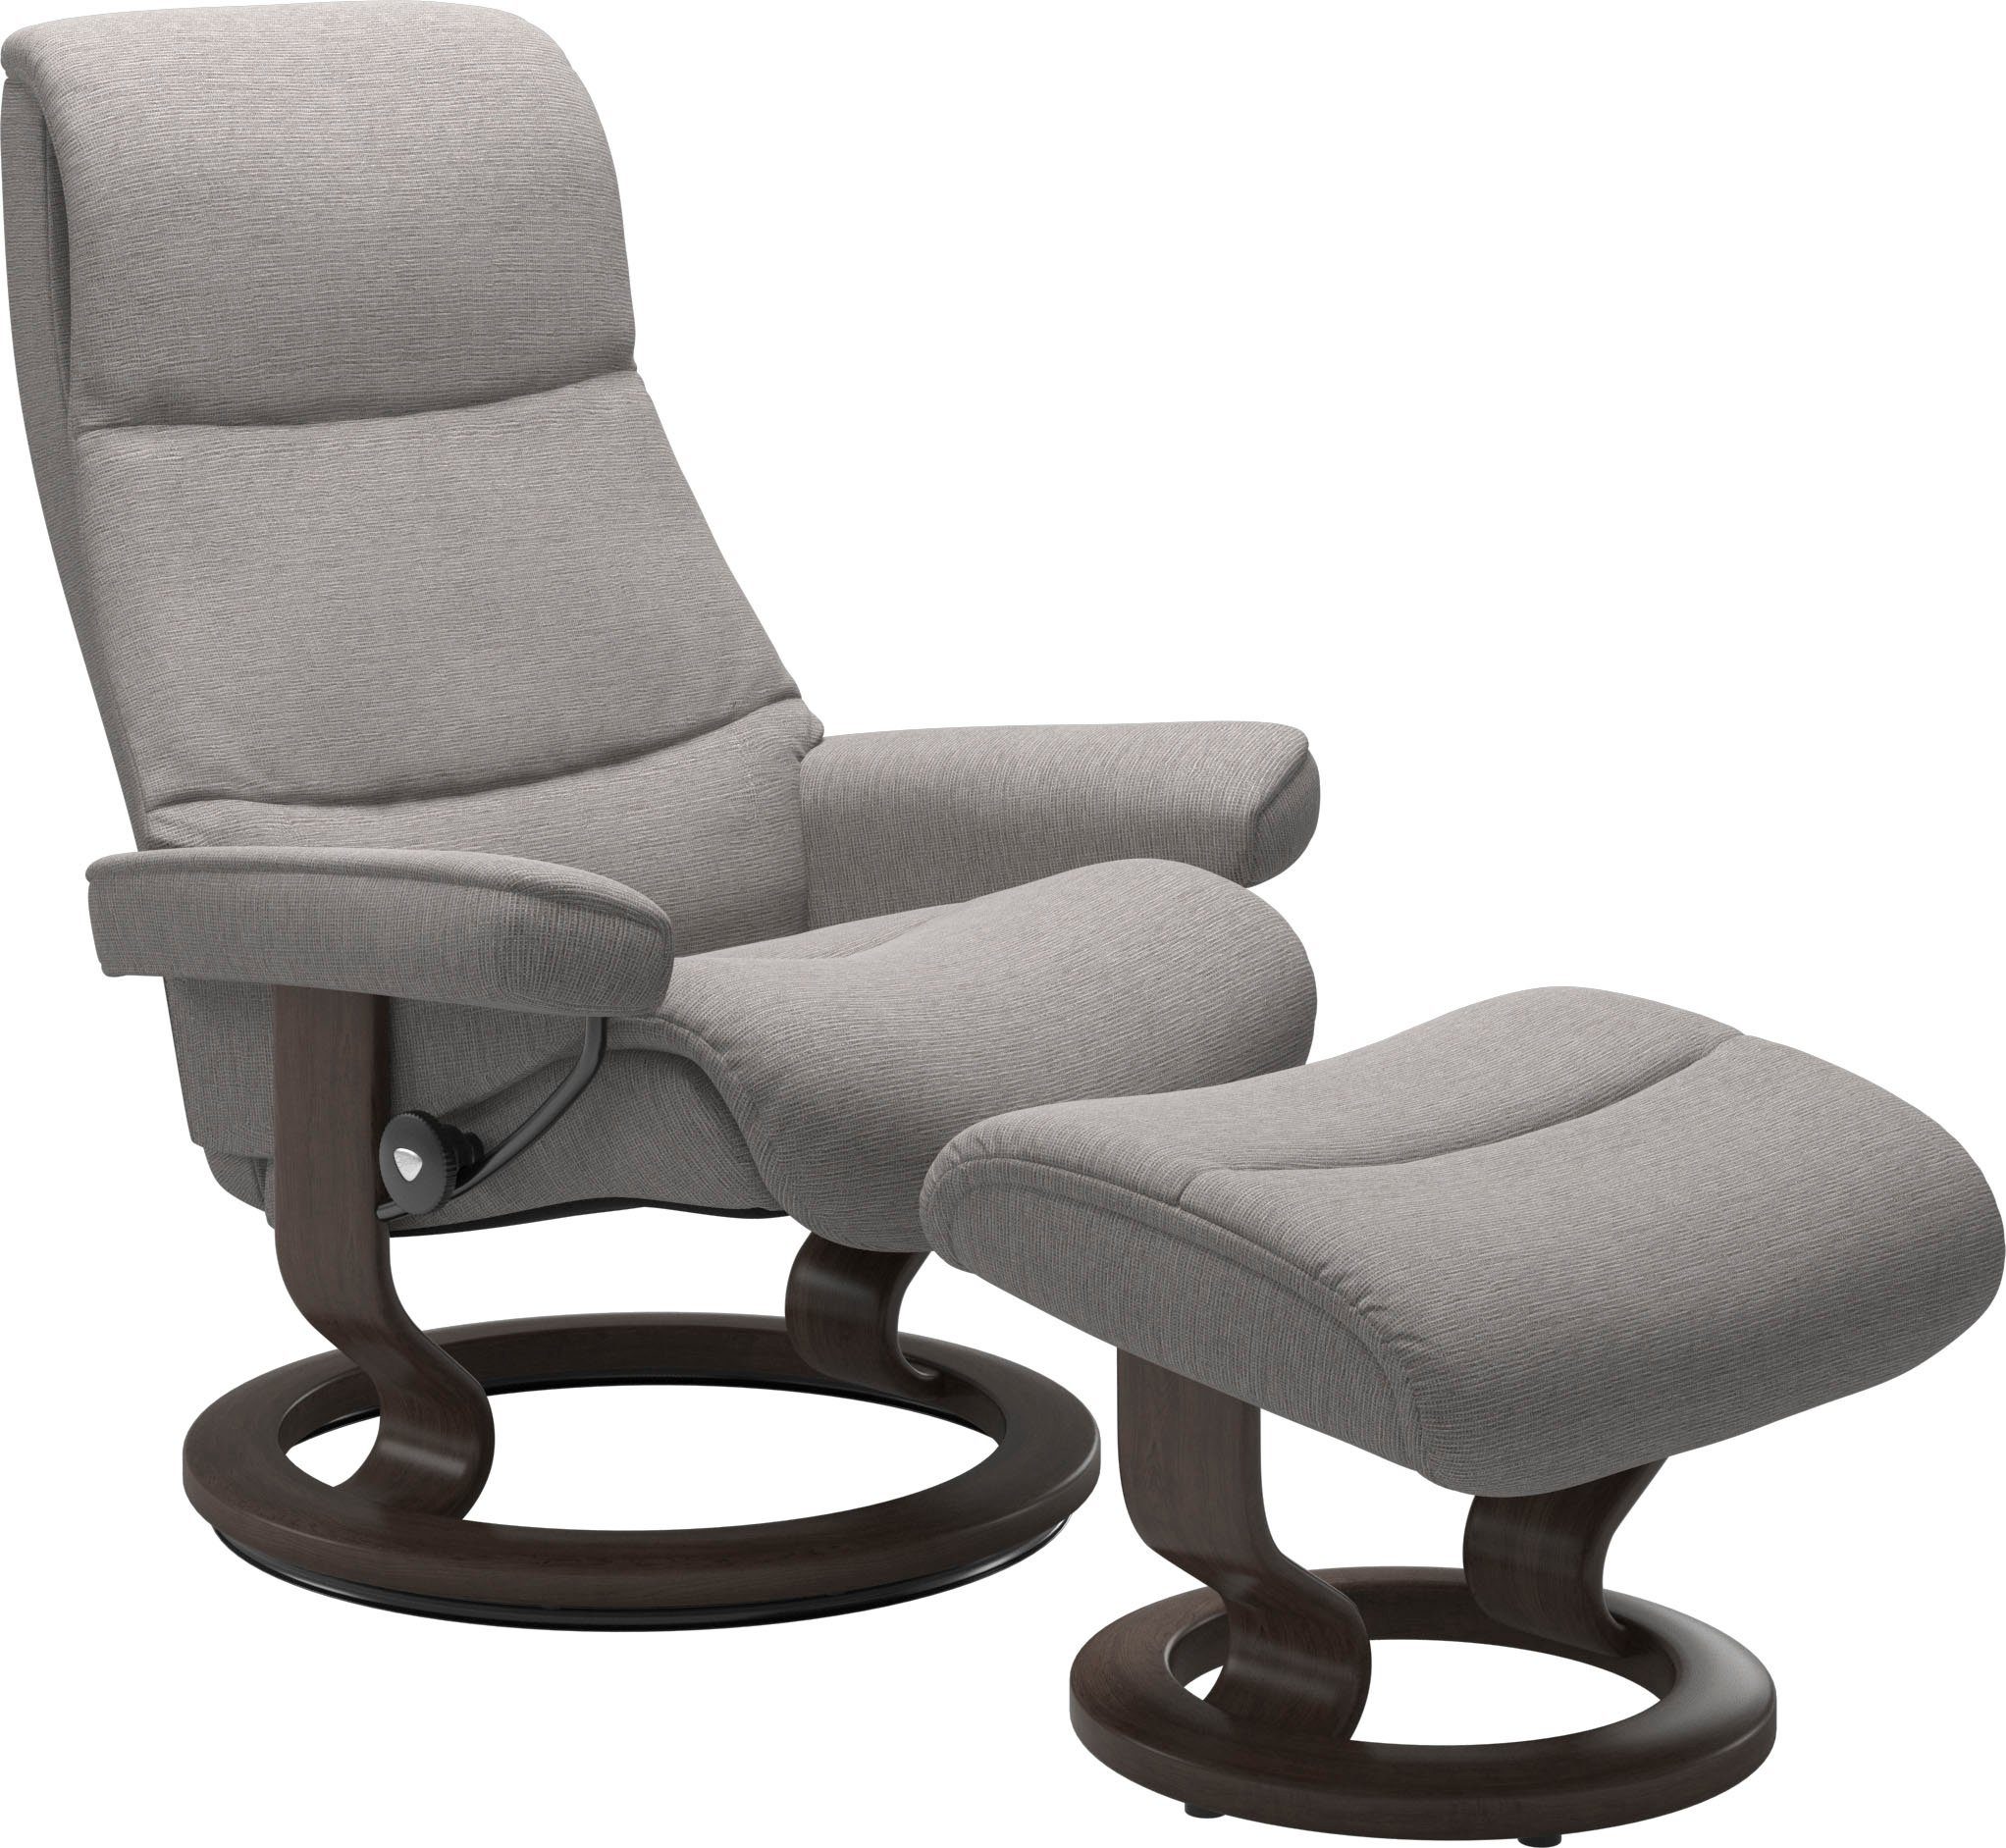 Stressless® Relaxsessel View, Classic Größe Wenge mit Base, M,Gestell